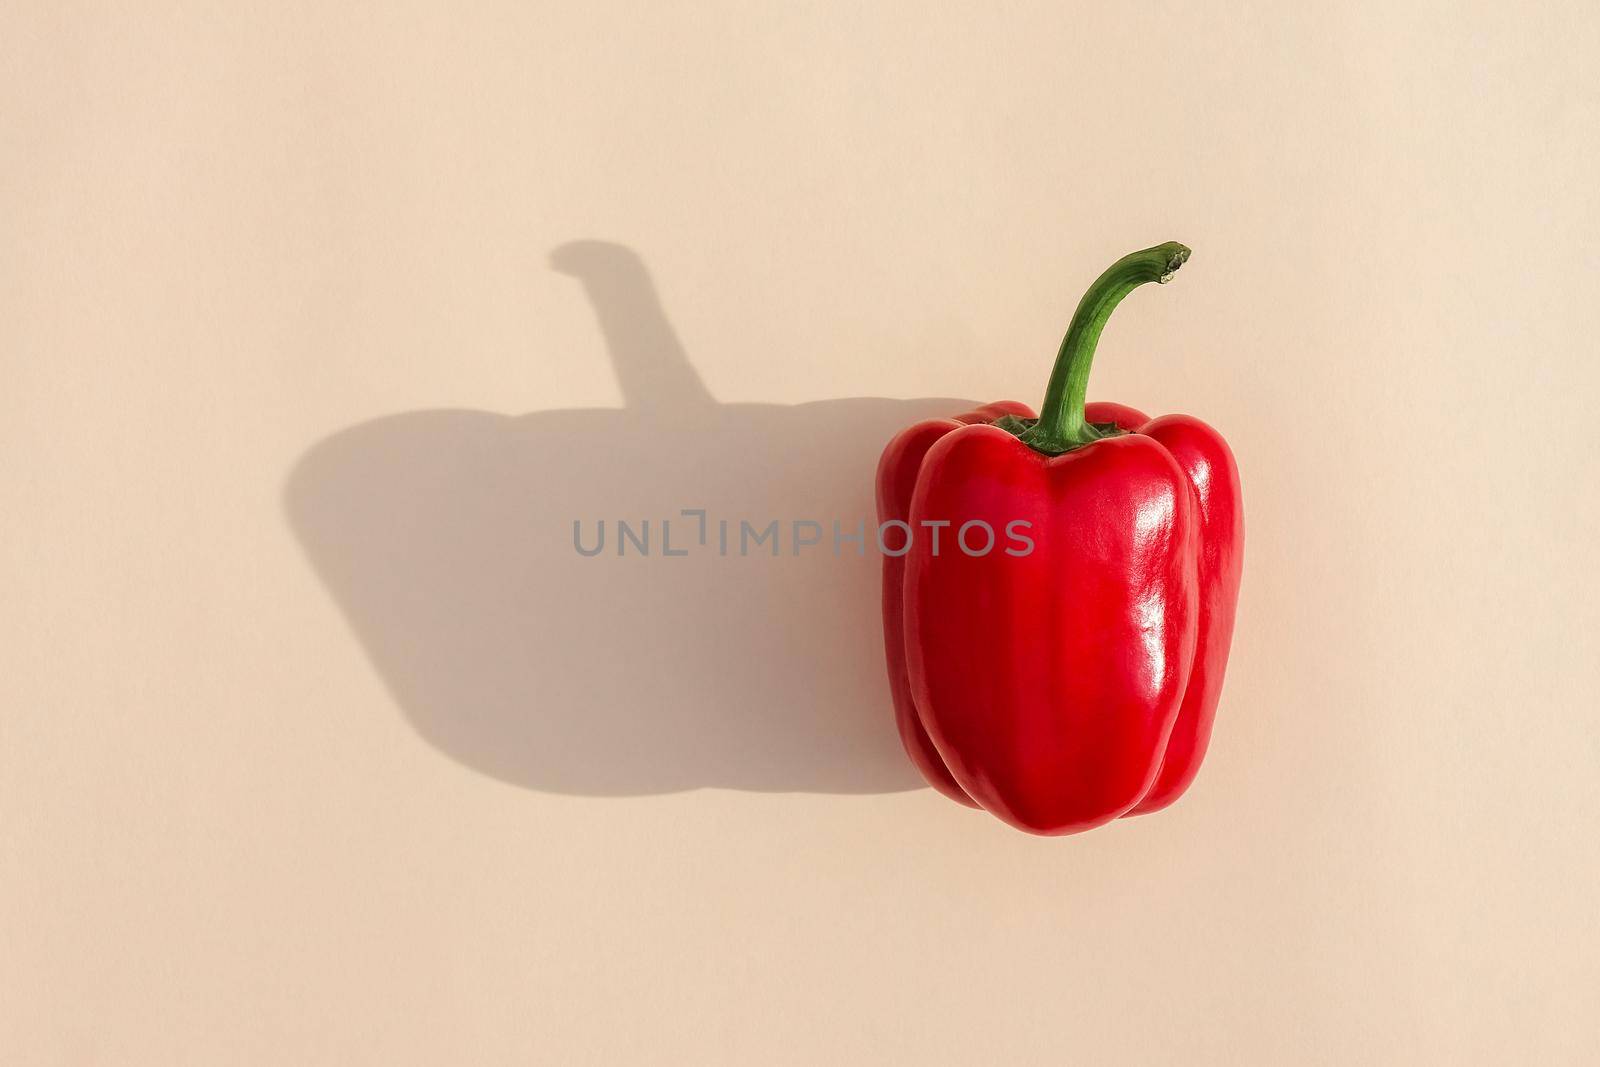 bell pepper on a colored background food pattern top view. High quality photo